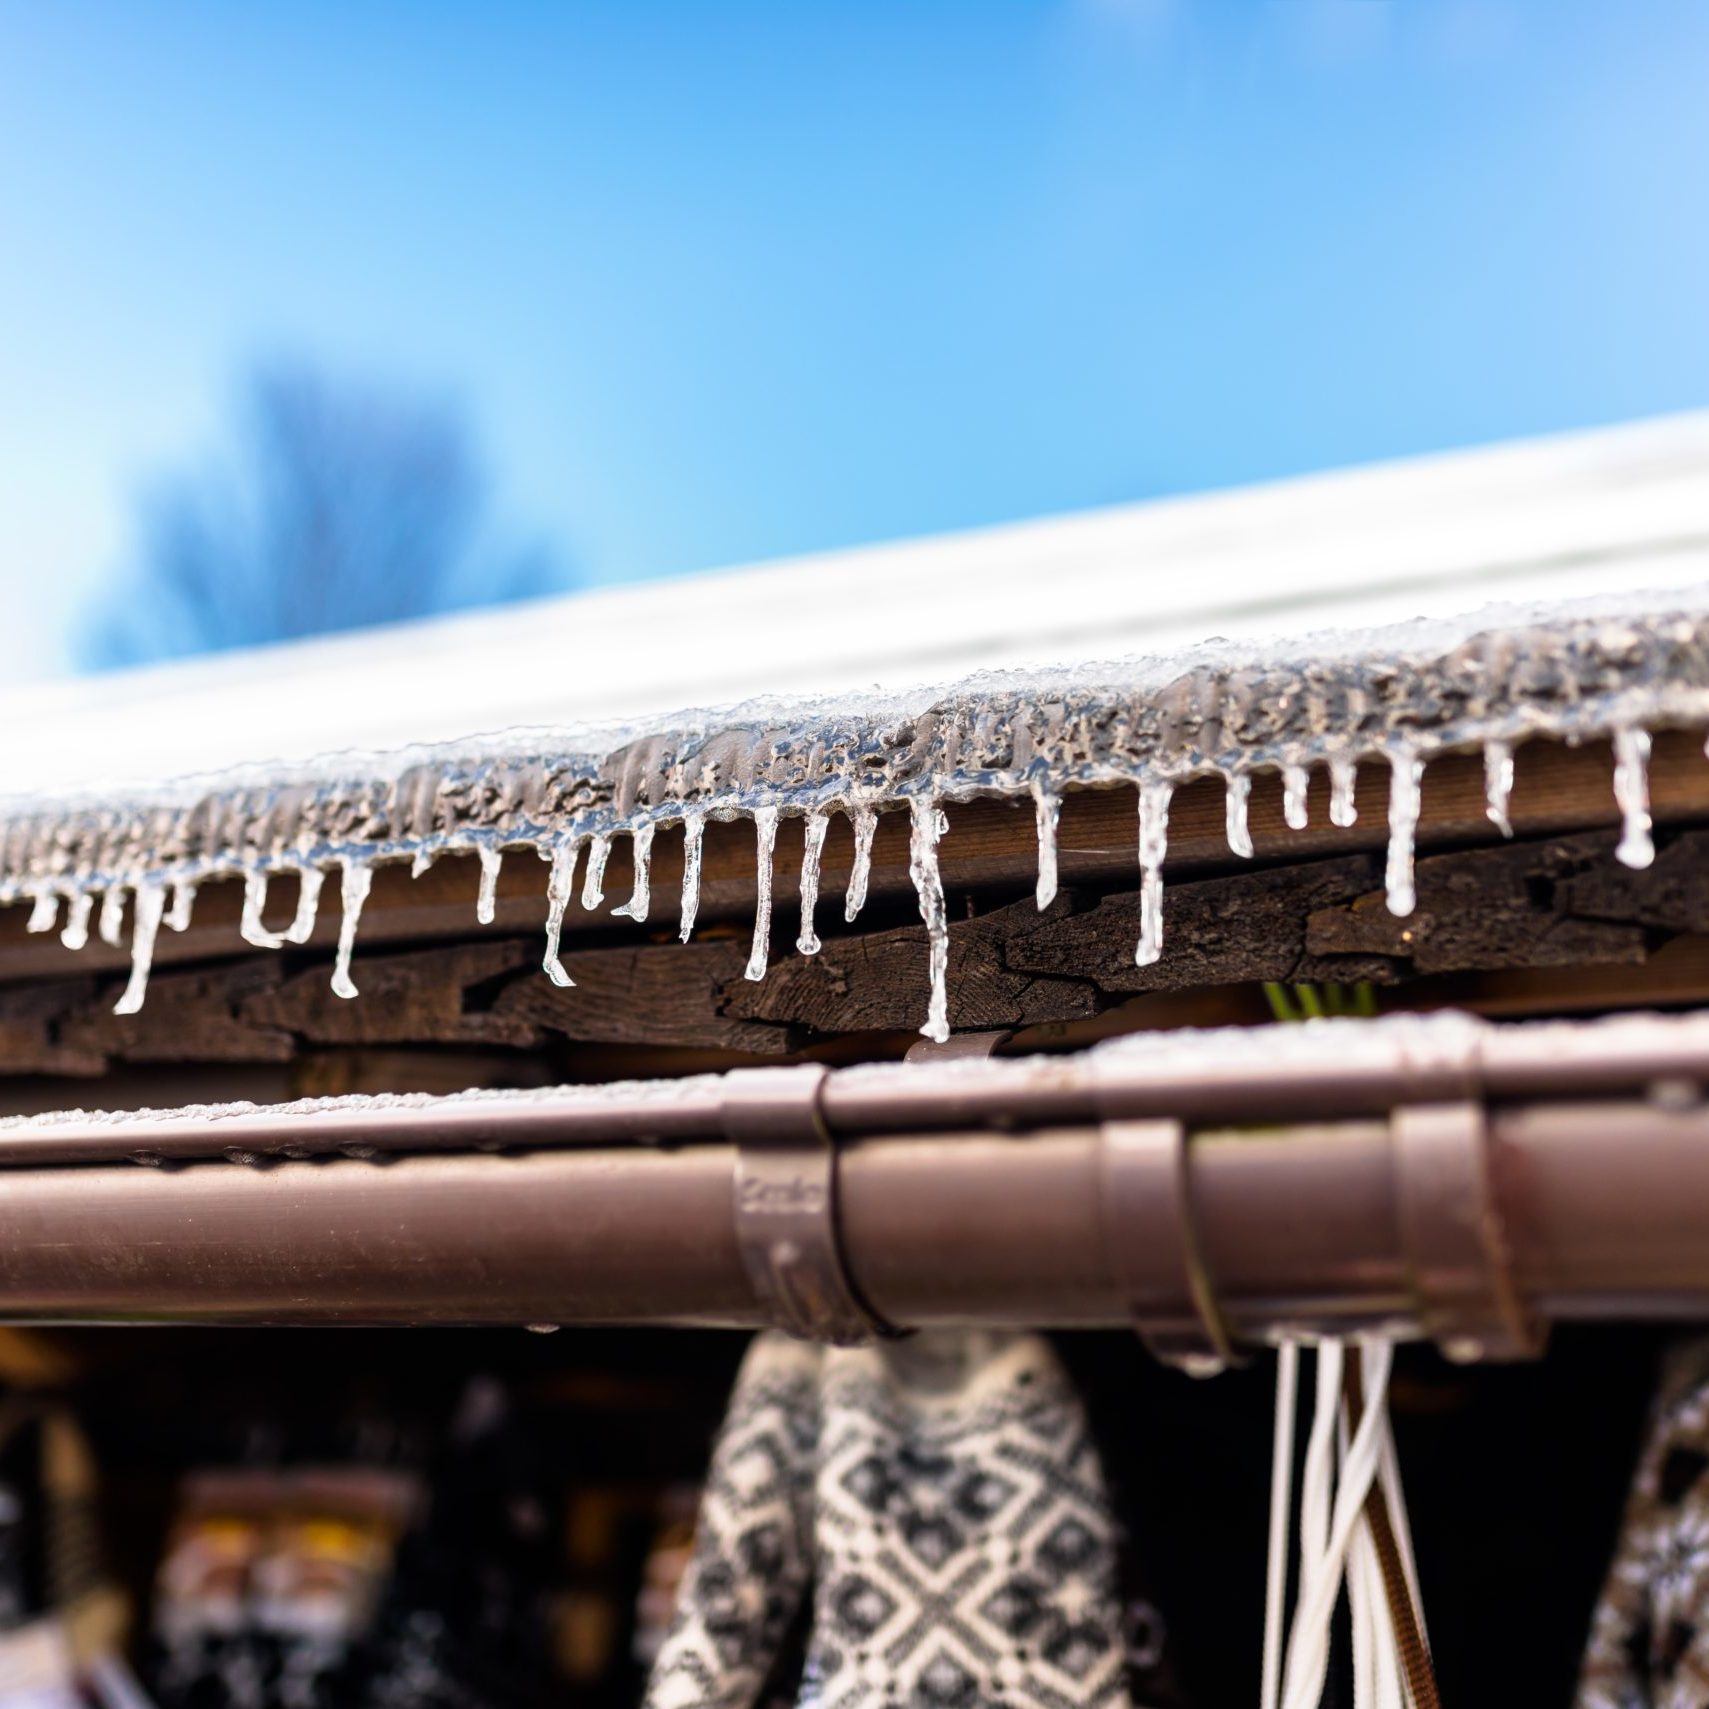 hanging-icicles-from-the-roof-of-a-wooden-building-2021-08-29-12-49-54-utc